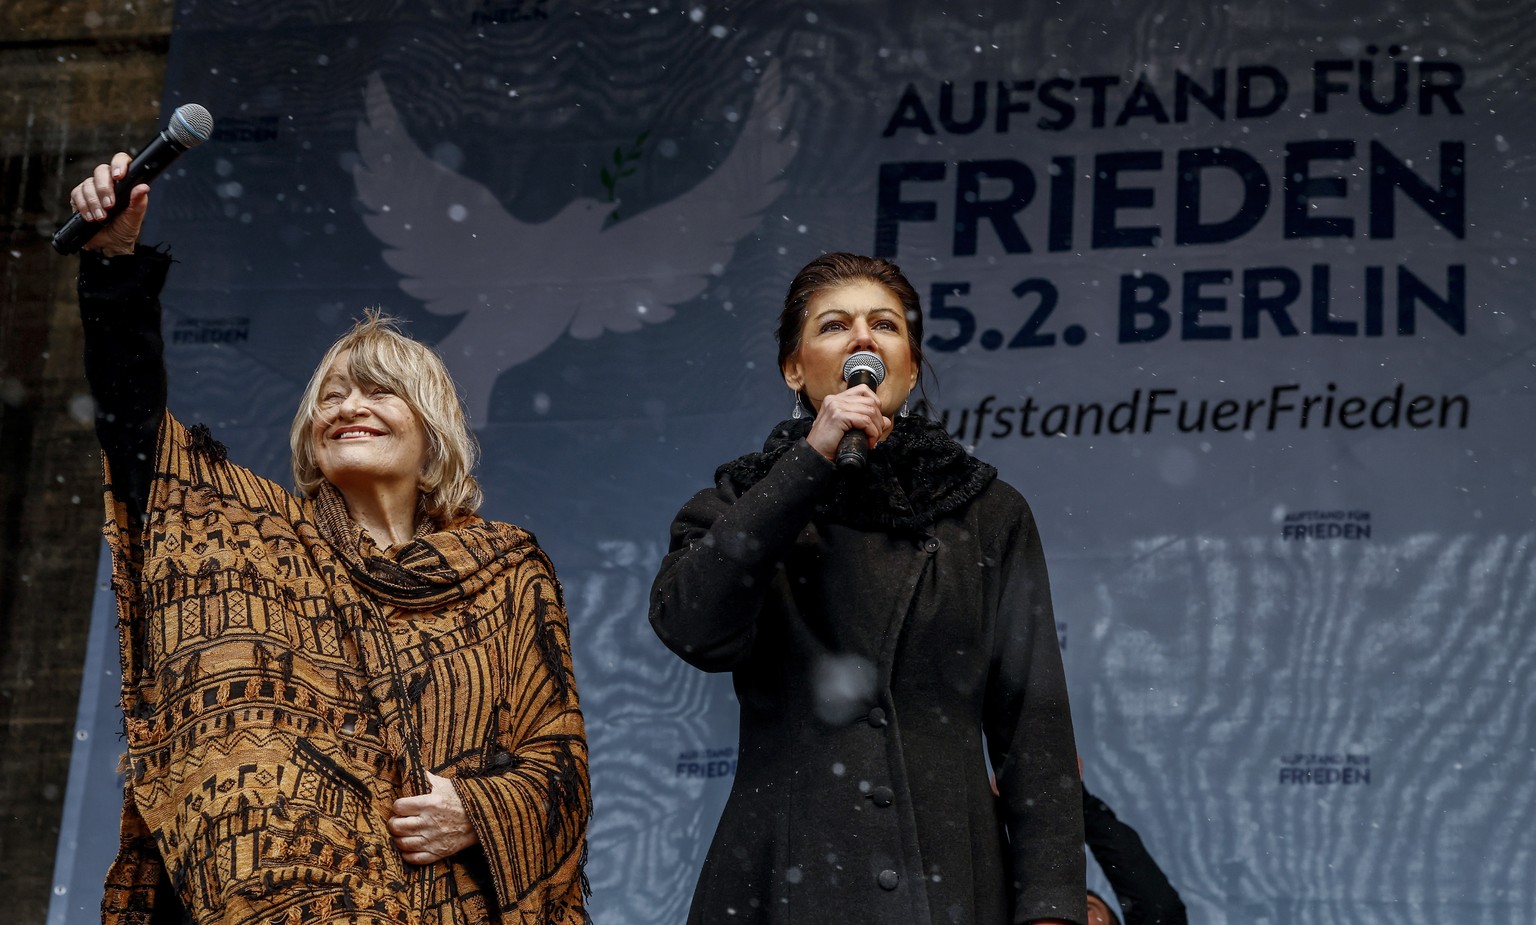 epa10490240 Women&#039;s rights activist and publisher Alice Schwarzer (L) and Sahra Wagenknecht (R) of Germany&#039;s The Left party Die Linke, speak during the demonstration &#039;Uprising for Peace ...